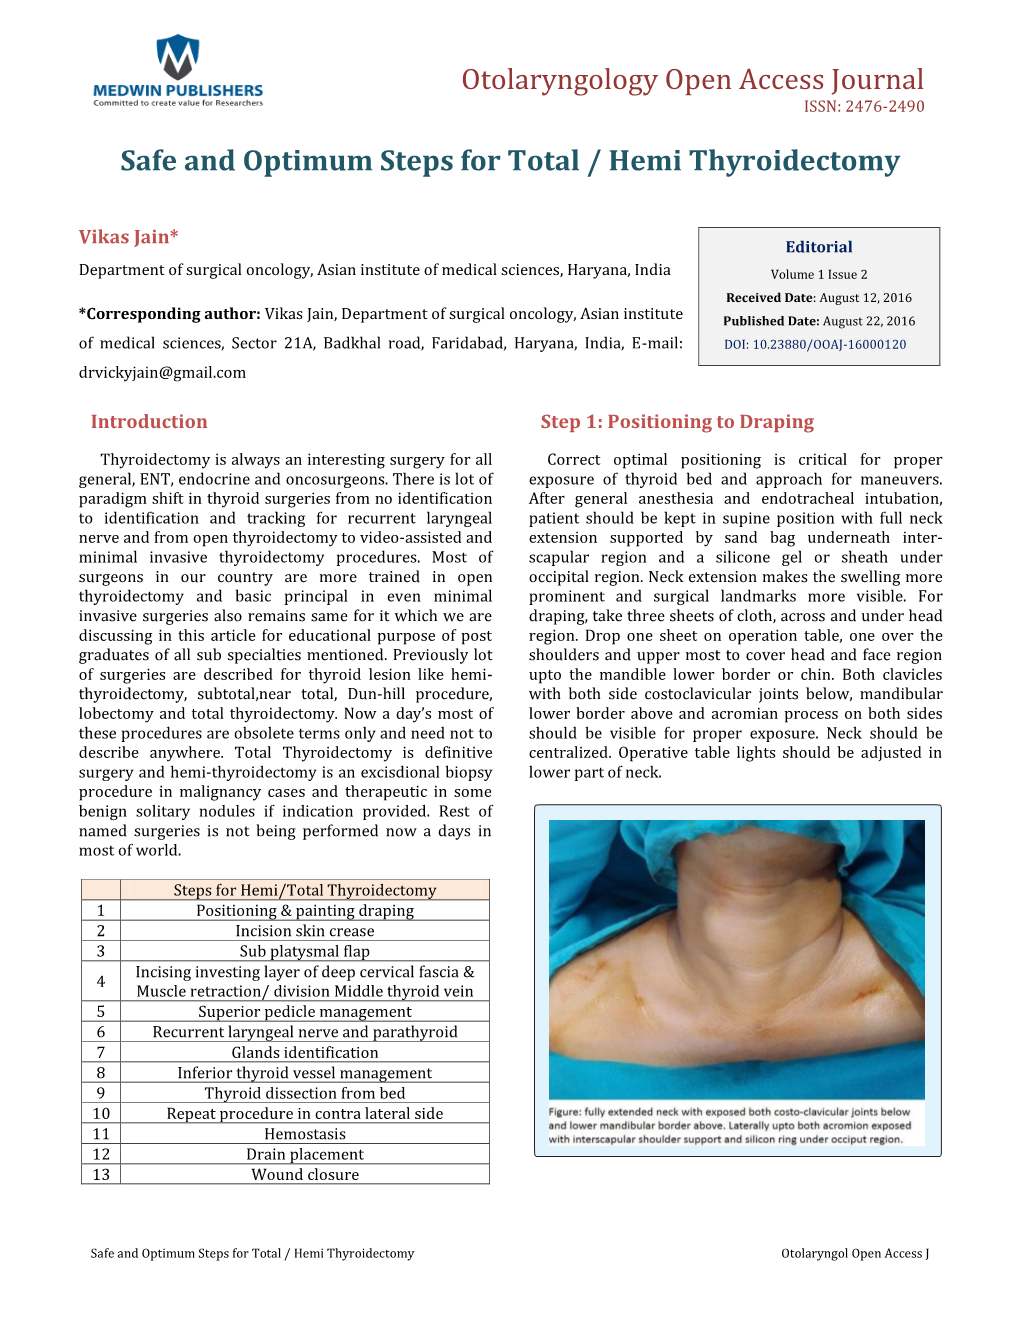 Safe and Optimum Steps for Total / Hemi Thyroidectomy